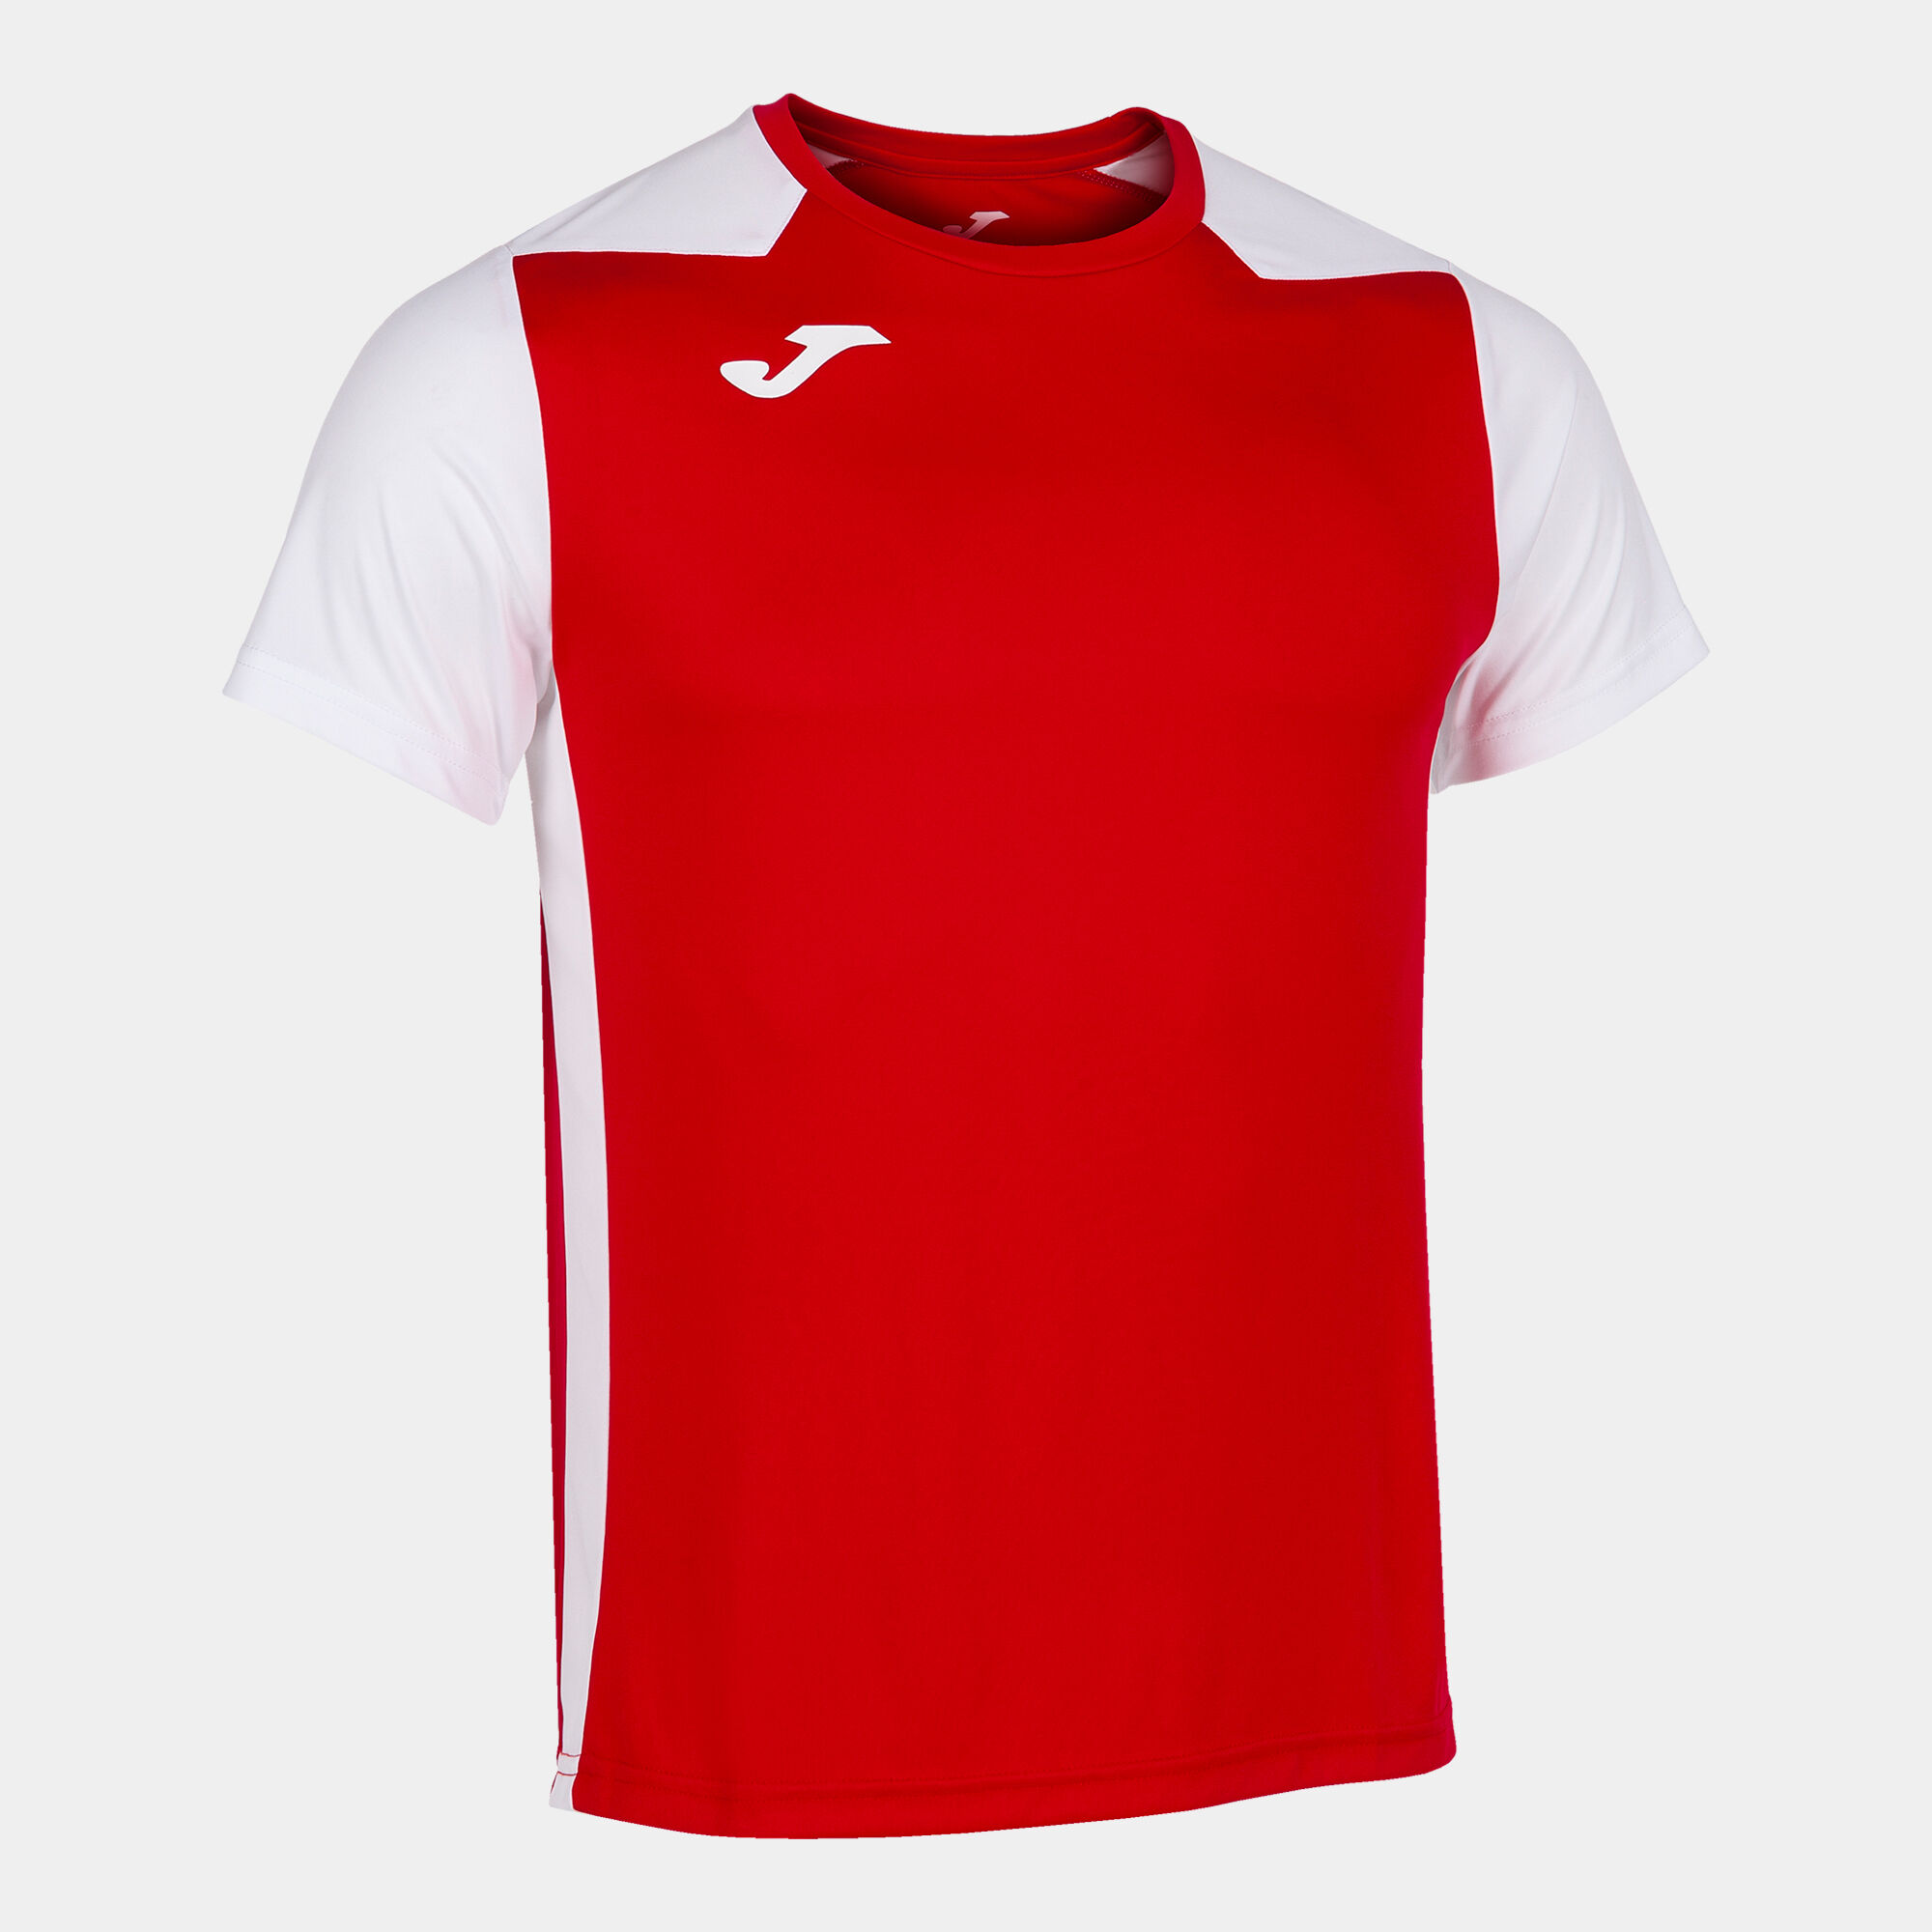 MAILLOT MANCHES COURTES HOMME RECORD II ROUGE BLANC